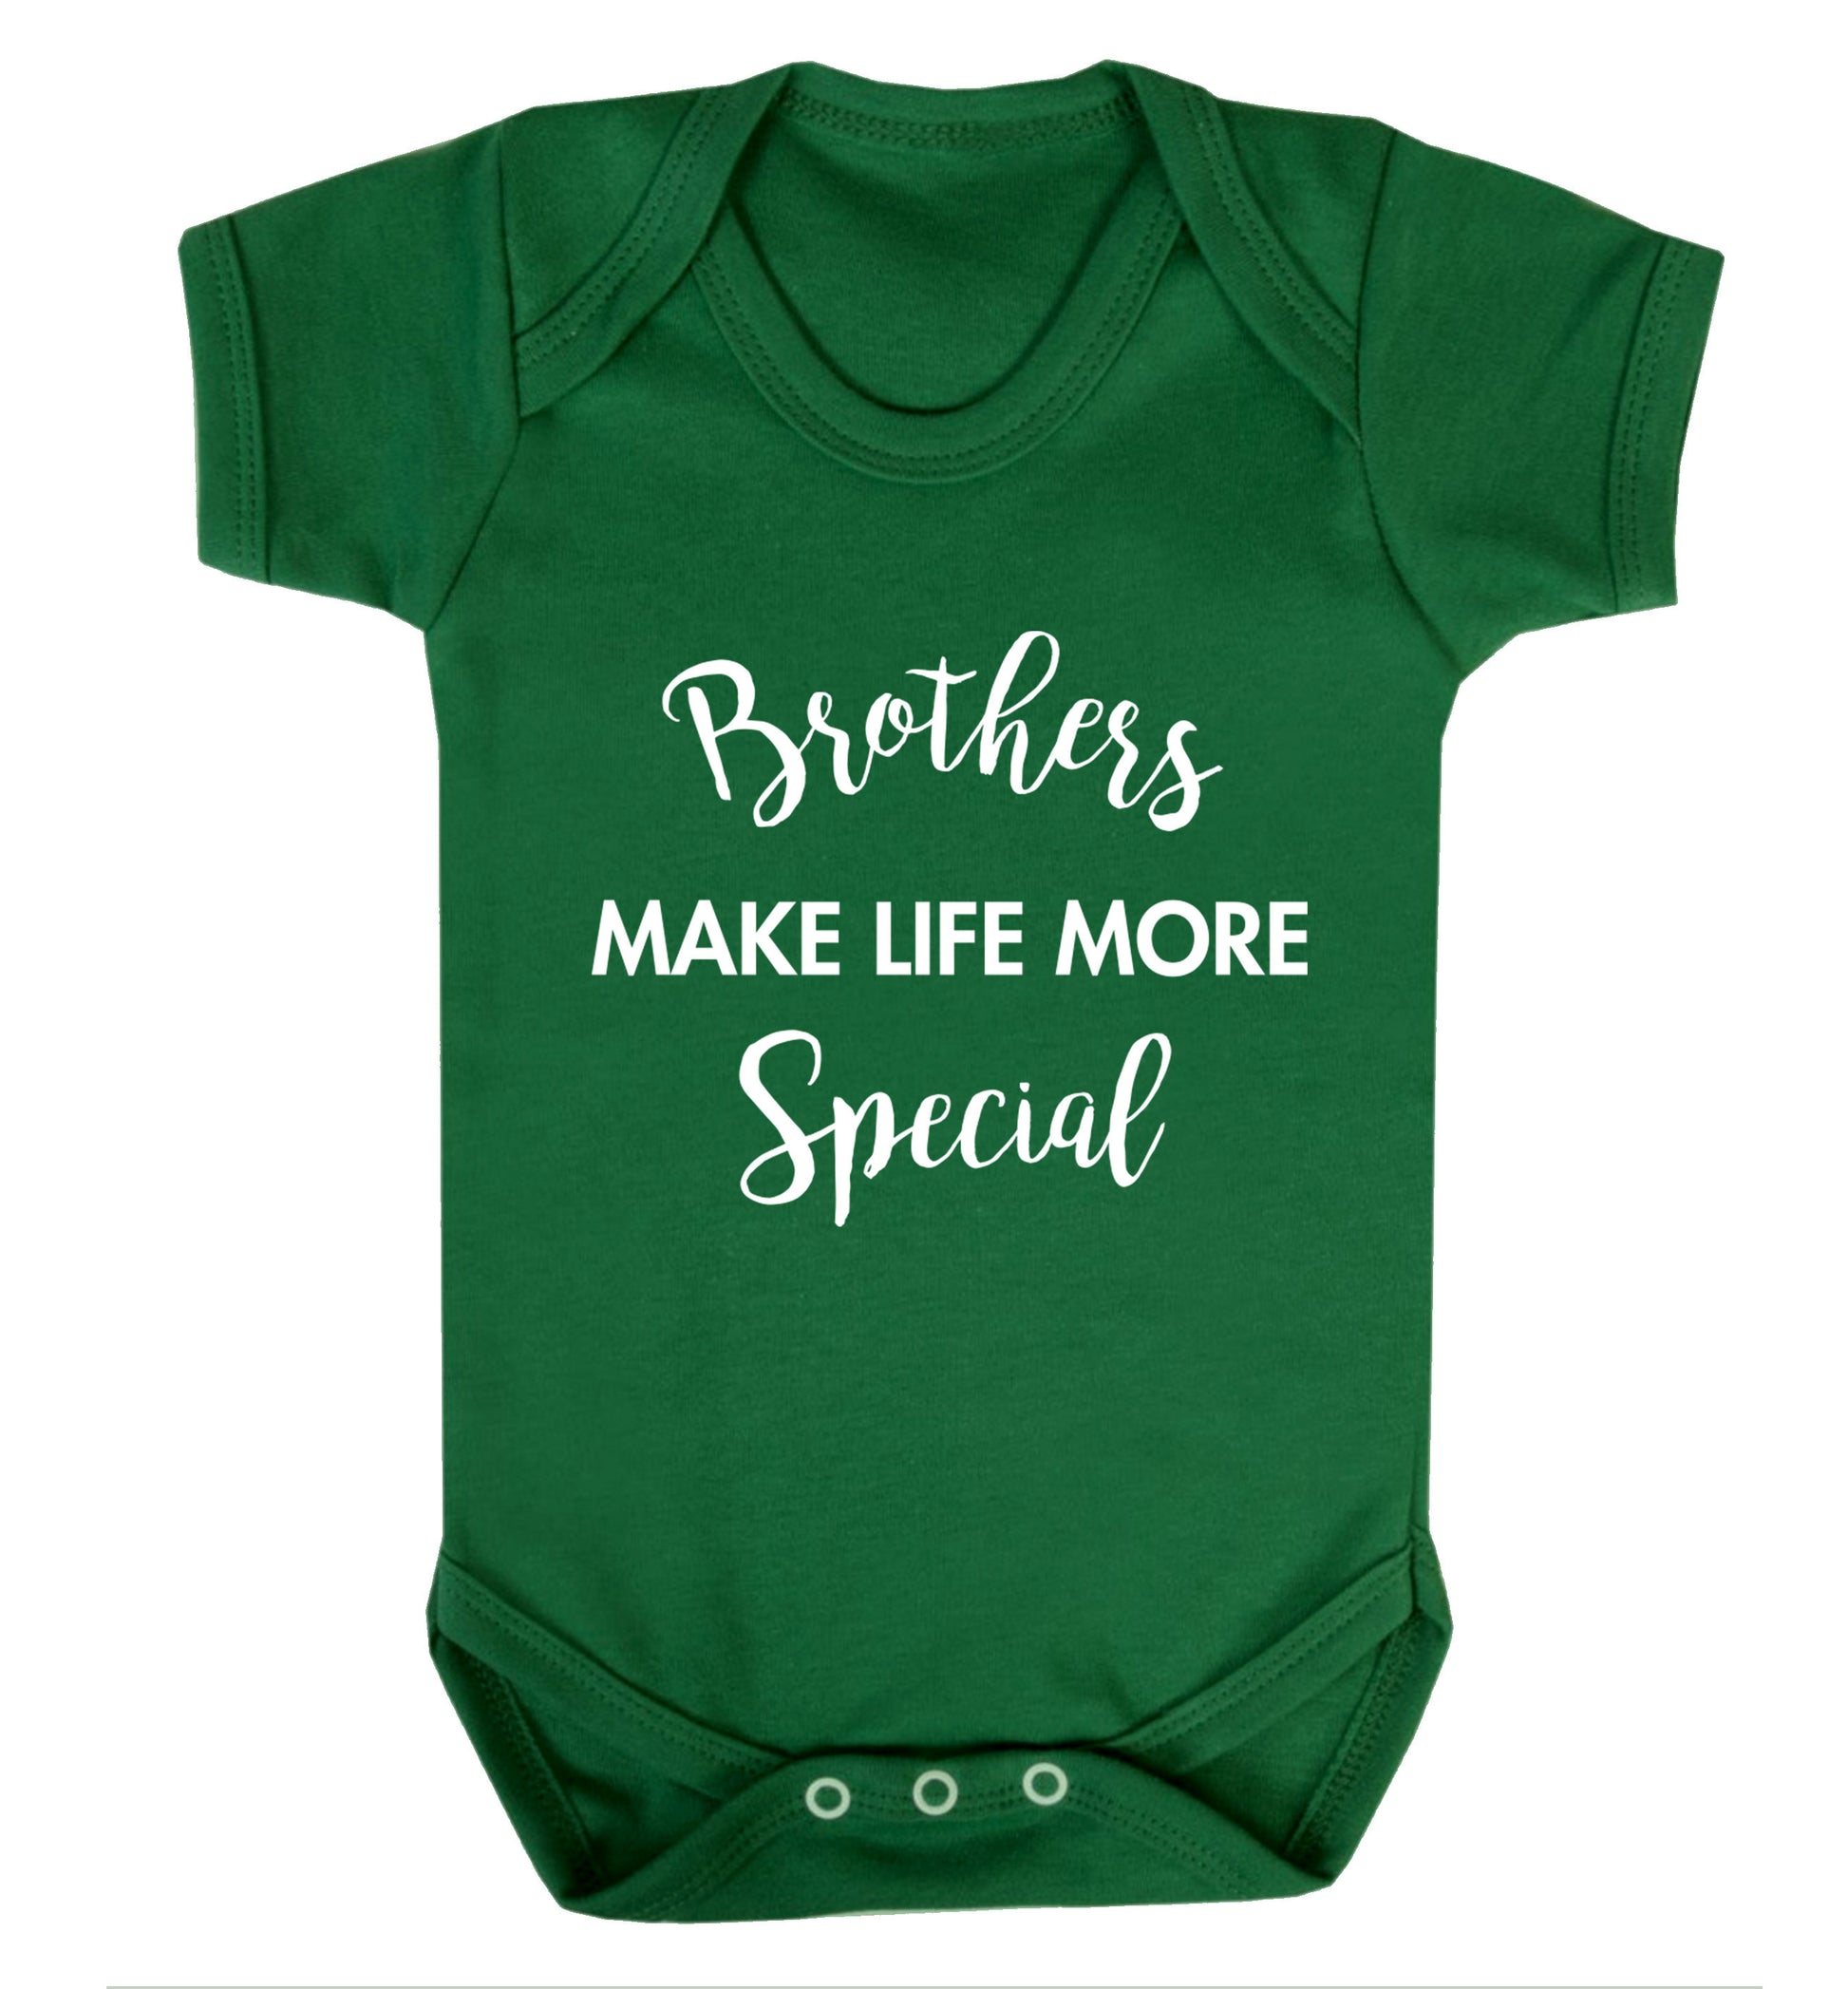 Brothers make life more special Baby Vest green 18-24 months